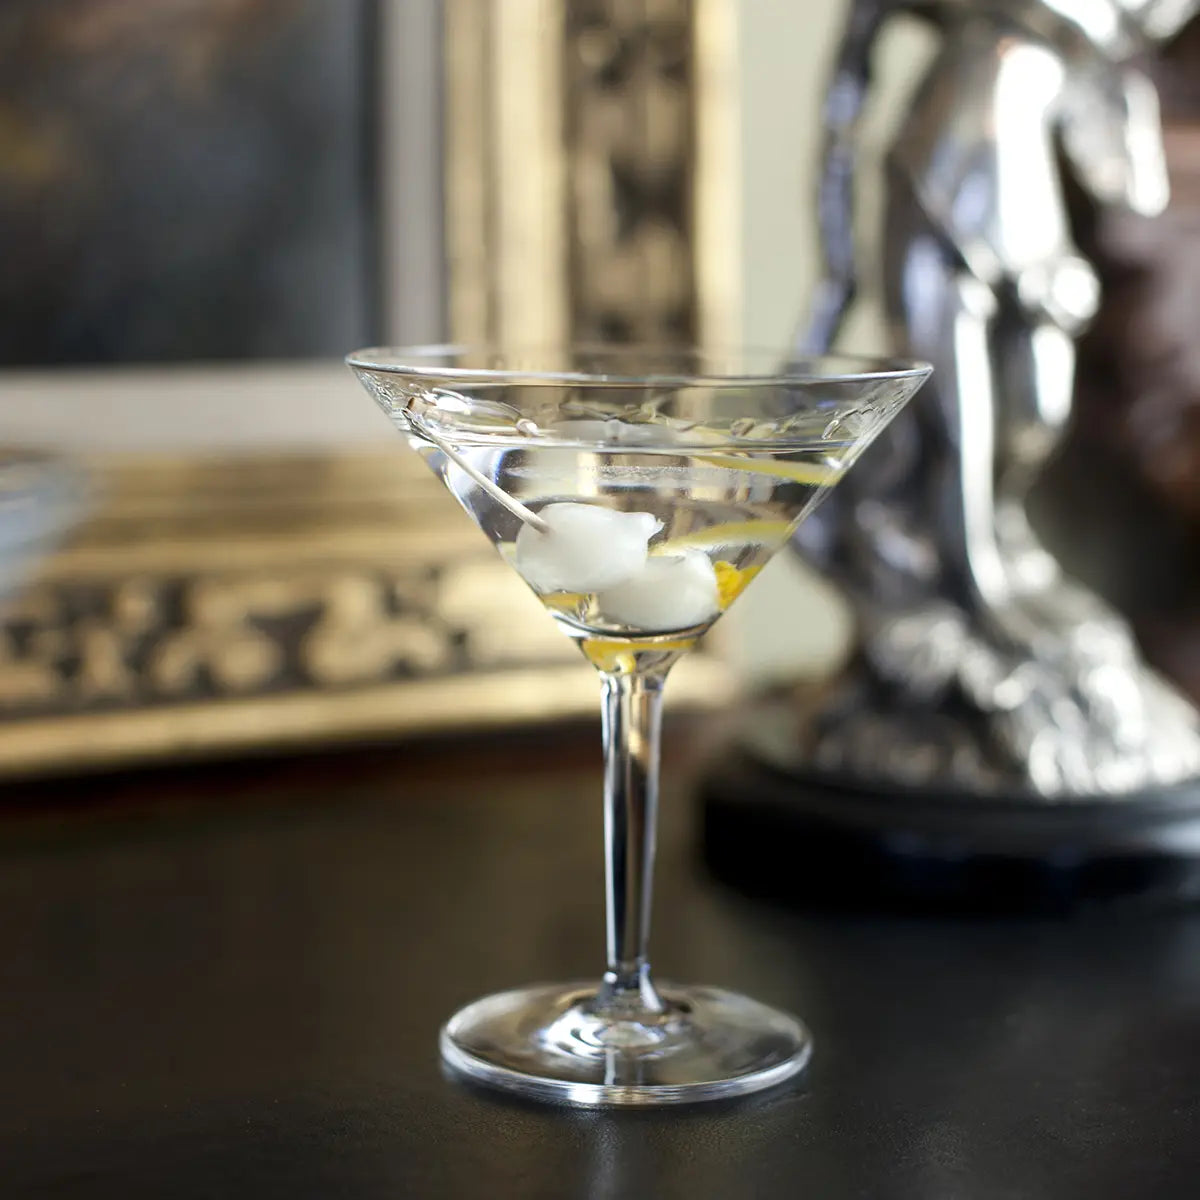 Filled Fortessa Classic Bar Martini set in a room next to a picture frame and home decorative item